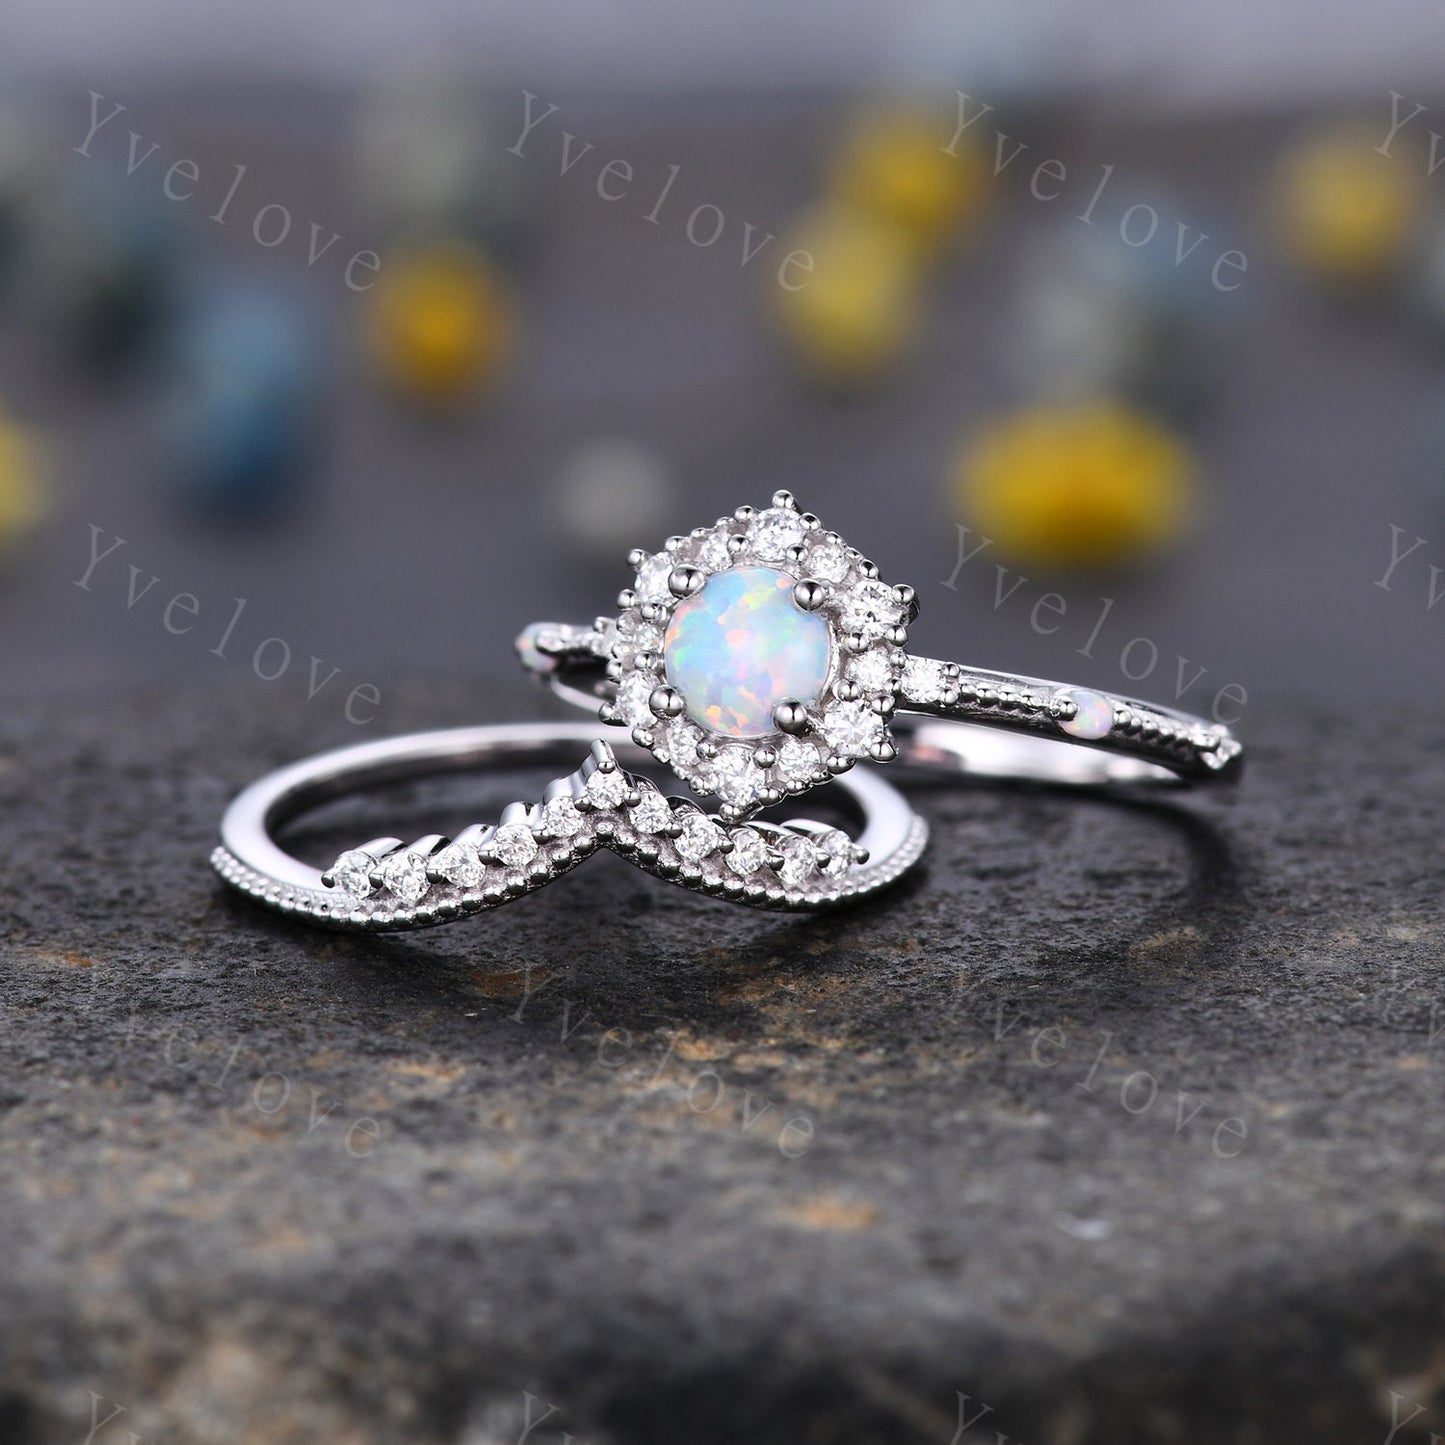 Vintage Opal Engagement Ring Set White Gold Ring Diamond Eternity Ring For Women Stacking Bridal Set Floral Halo Promise Anniversary Gift